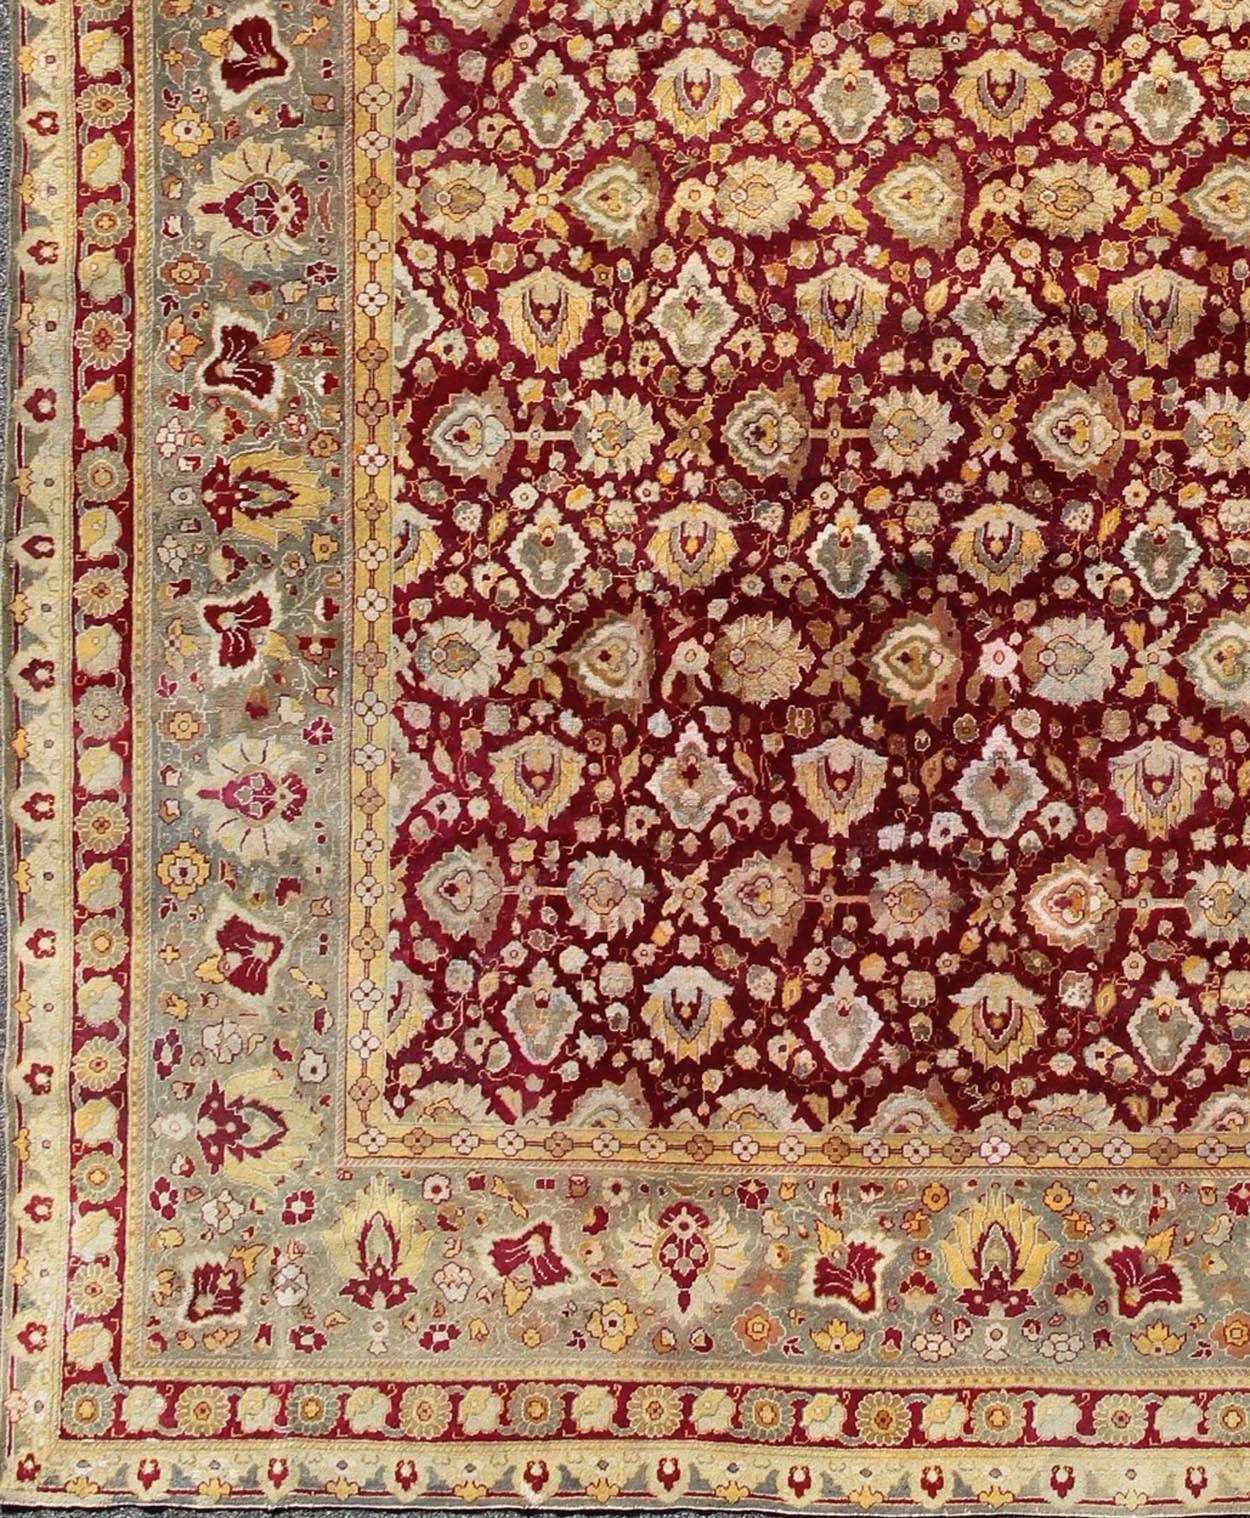 Elegant Antique 19th Century Indian Agra rug in Maroon red background and gray green border. Keivan Woven Arts Rug / 13-1105, Indian antique Agra. Antique Amritsar. Antique Indian rugs. Antique Mughal carpet.

Measures:   11'8 x 14'3.

This antique